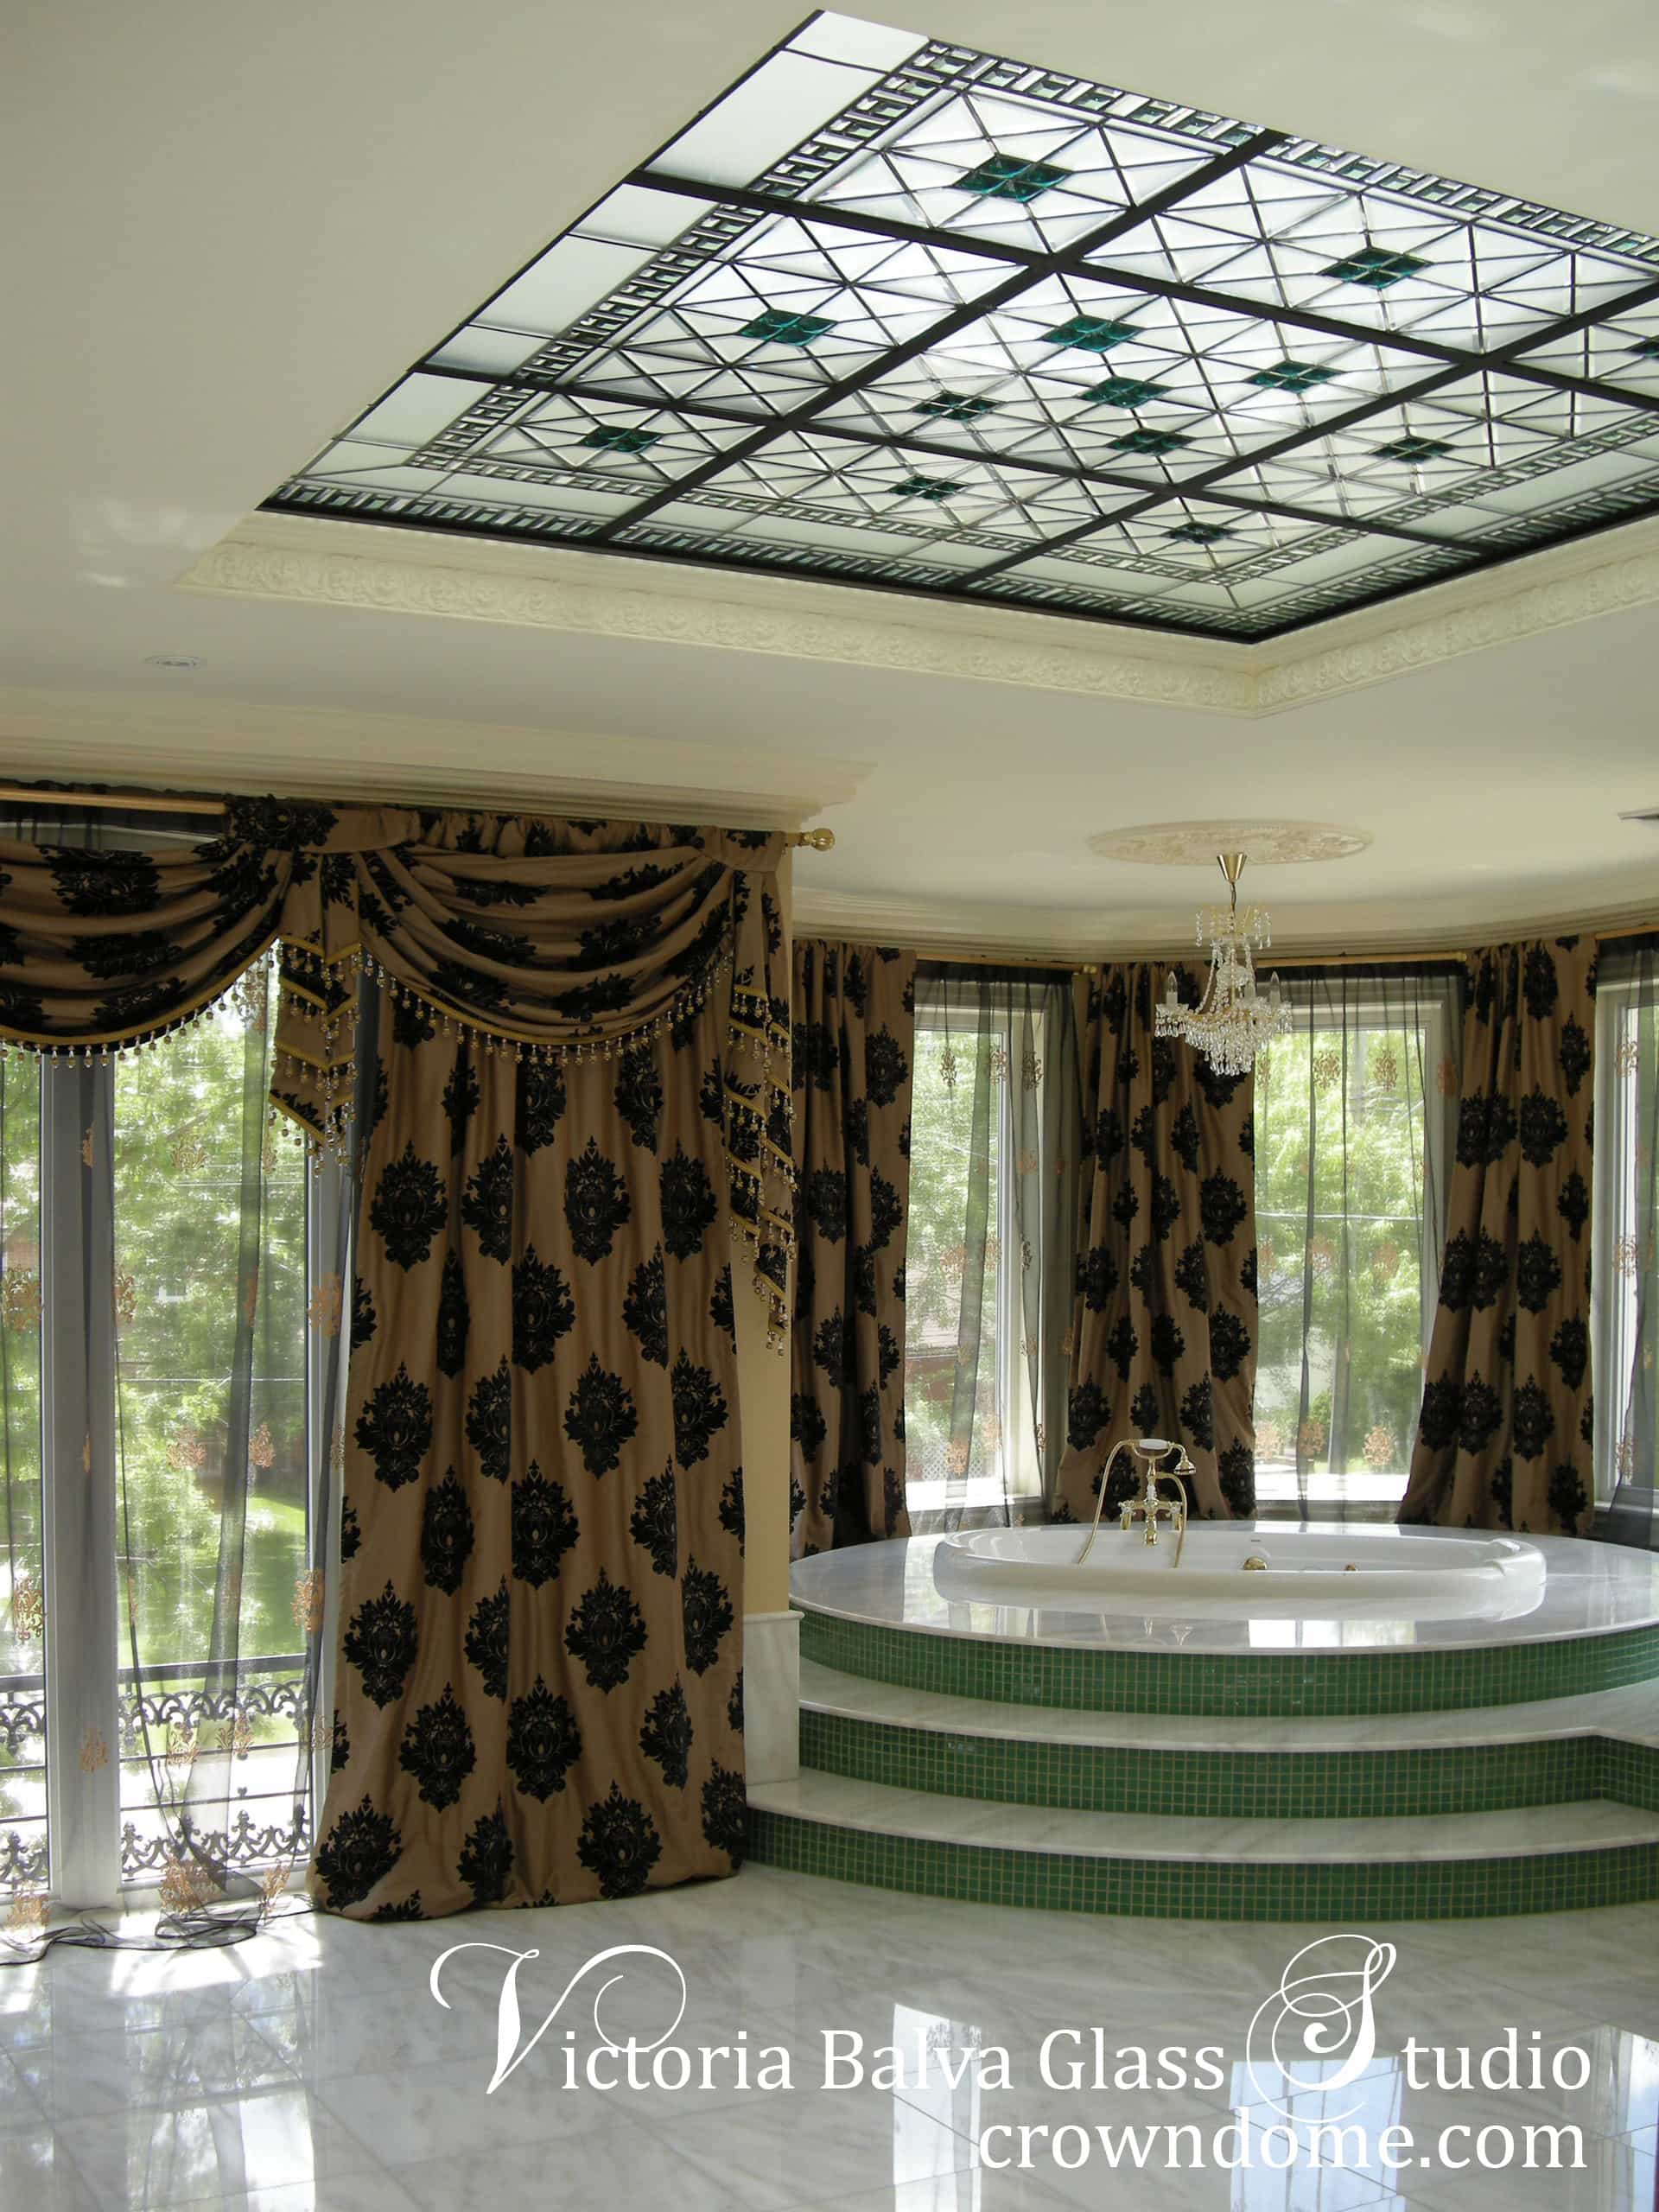 Gorgeous bathroom stained beveled leaded glass skylight ceiling with emerald accent jewels and colored beveled glass for a bathroom of a custom built residence. Simple geometric stained leaded glass design with custom beveled glass and large emerald jewels by glass artist Victoria Balva